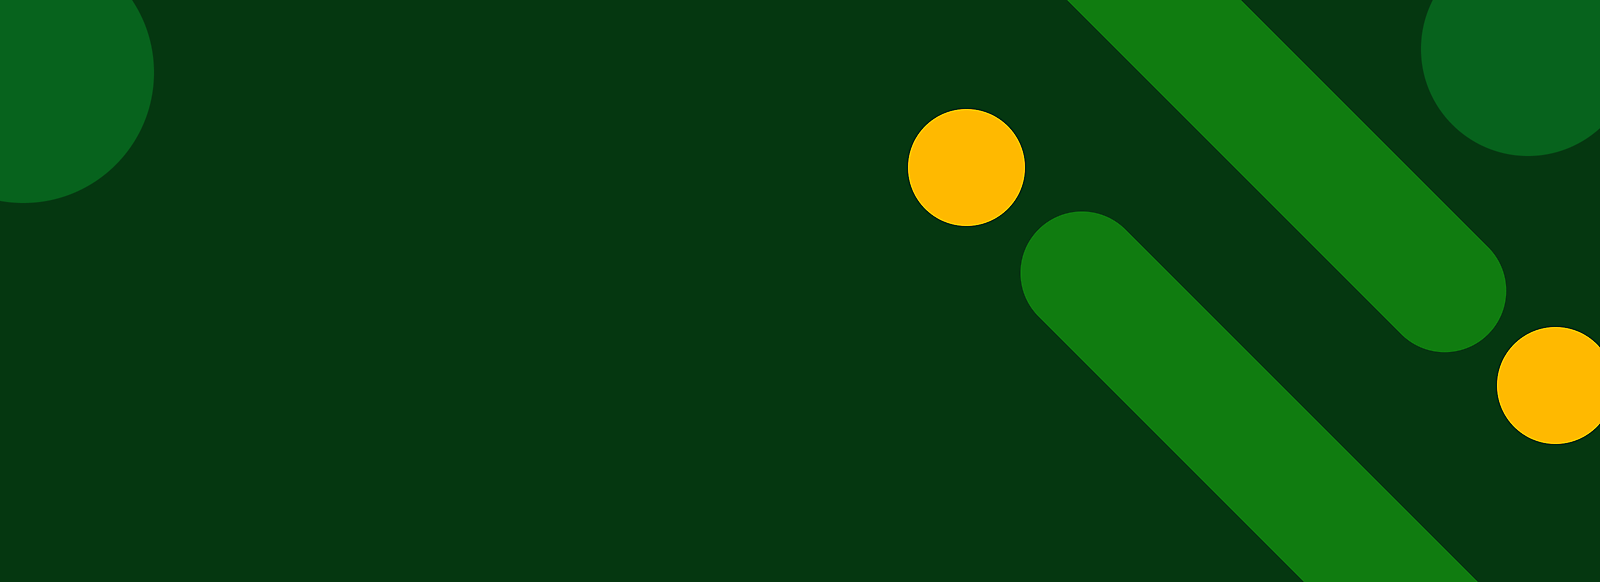 Abstract green background with yellow dots and diagonal green stripes.